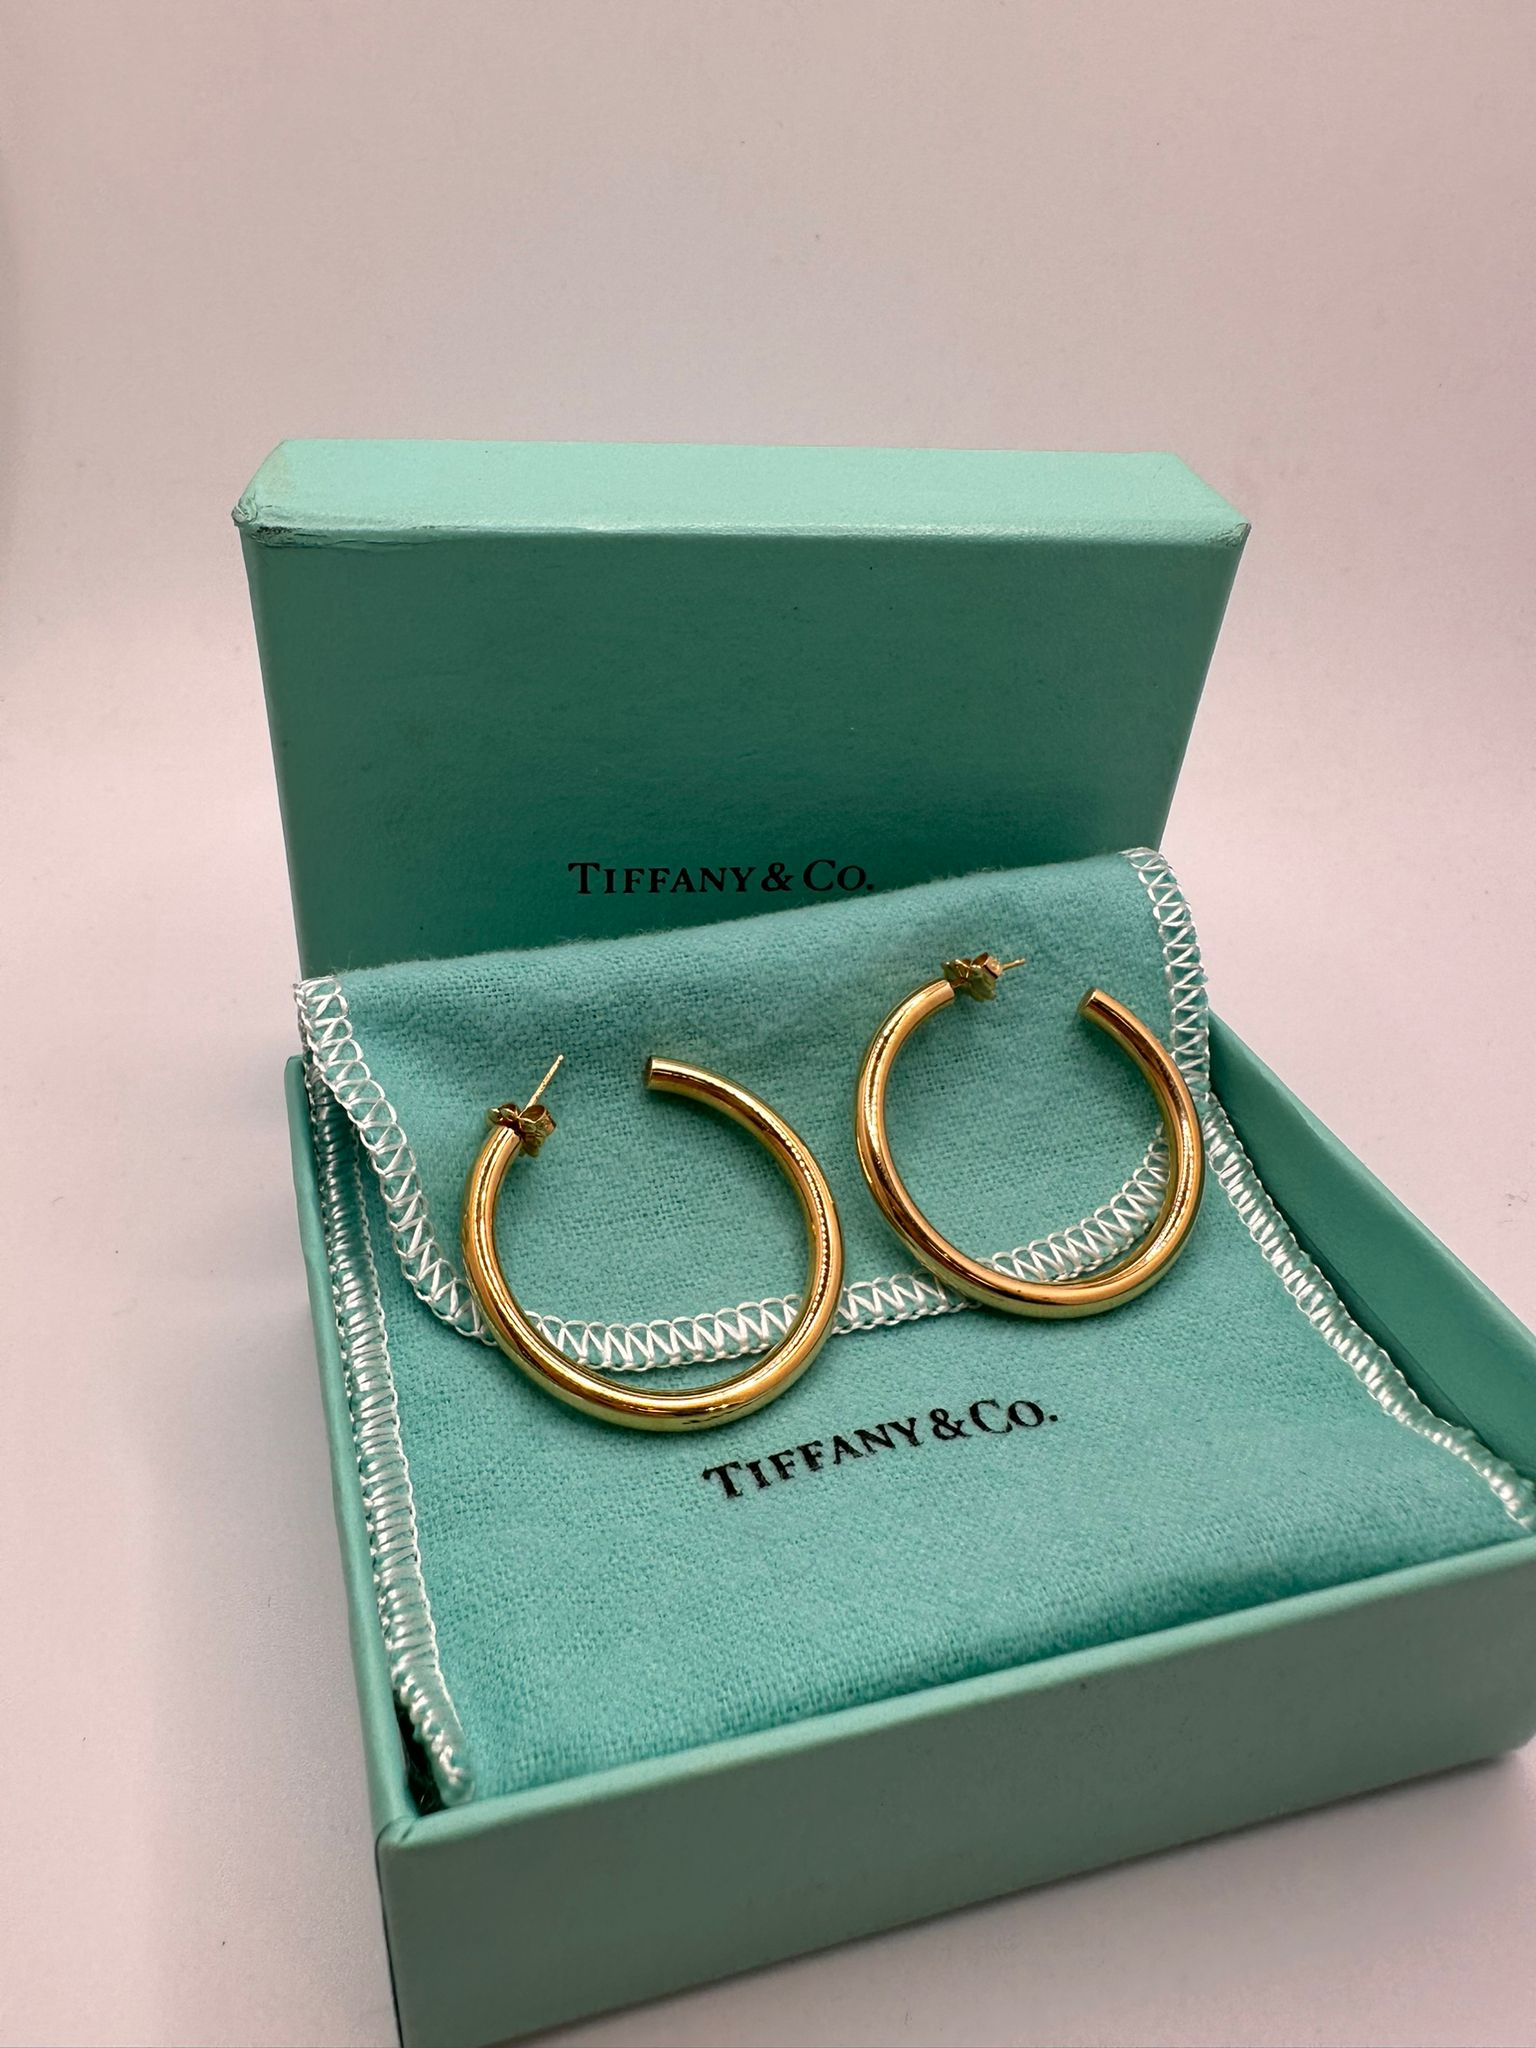 18ct gold Tiffany & Co earrings - Image 4 of 4